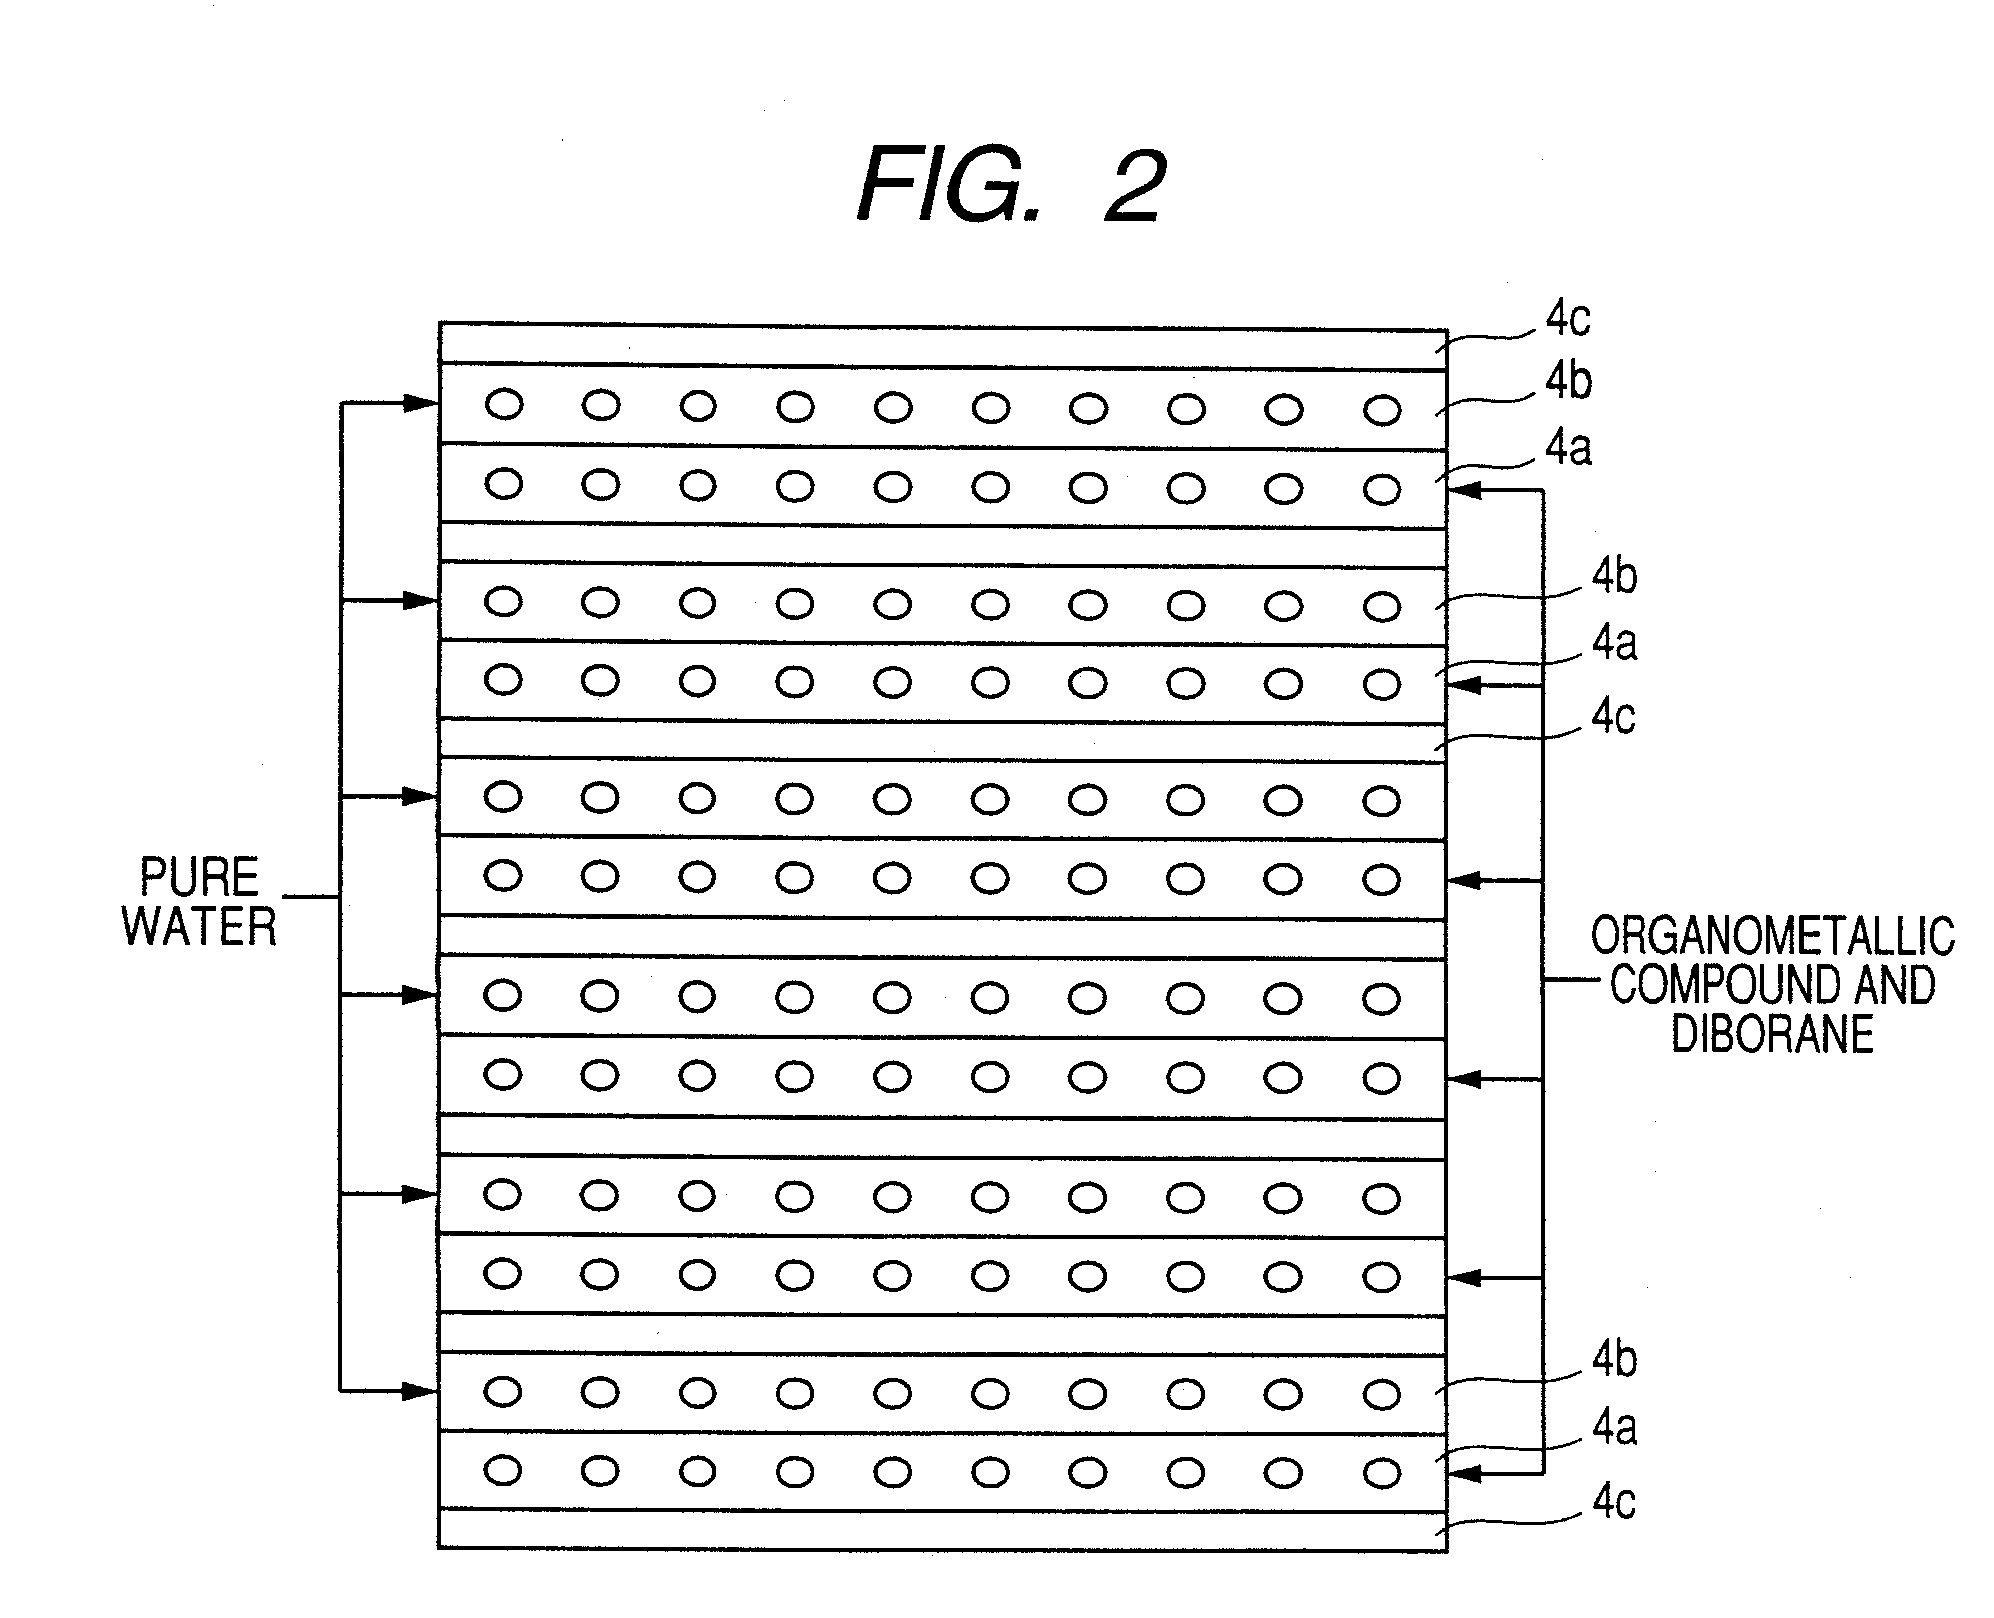 Transparent conductive film deposition apparatus, film deposition apparatus for continuous formation of multilayered transparent conductive film, and method of forming the film